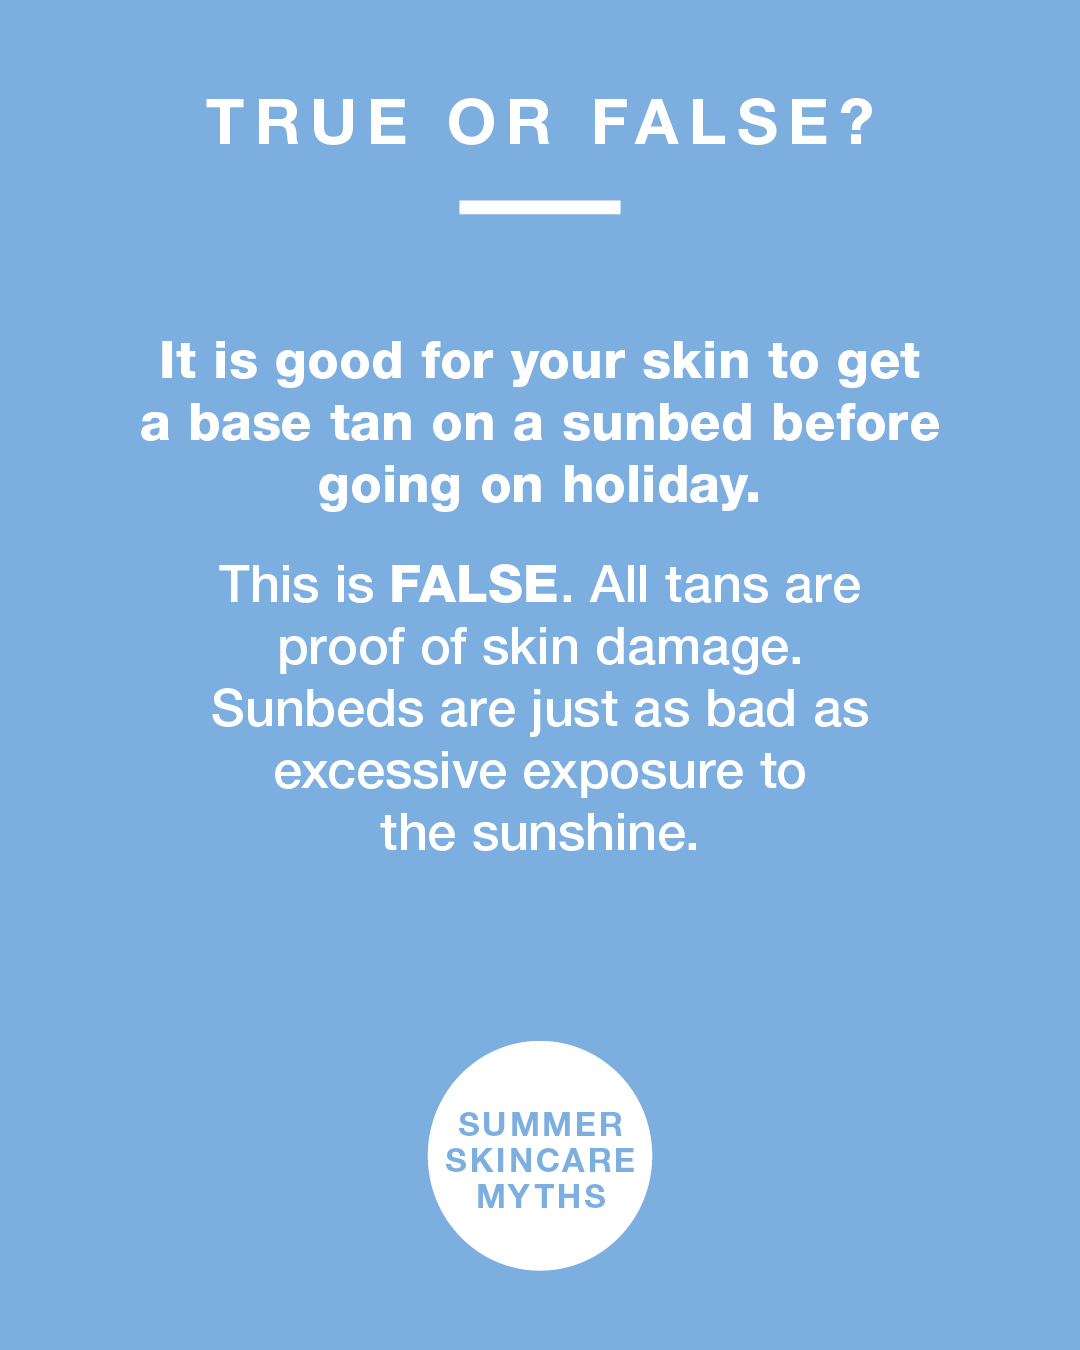 Summer skincare facts true or false. Is it good to get a base tan on a sunbed before going on holiday. False.